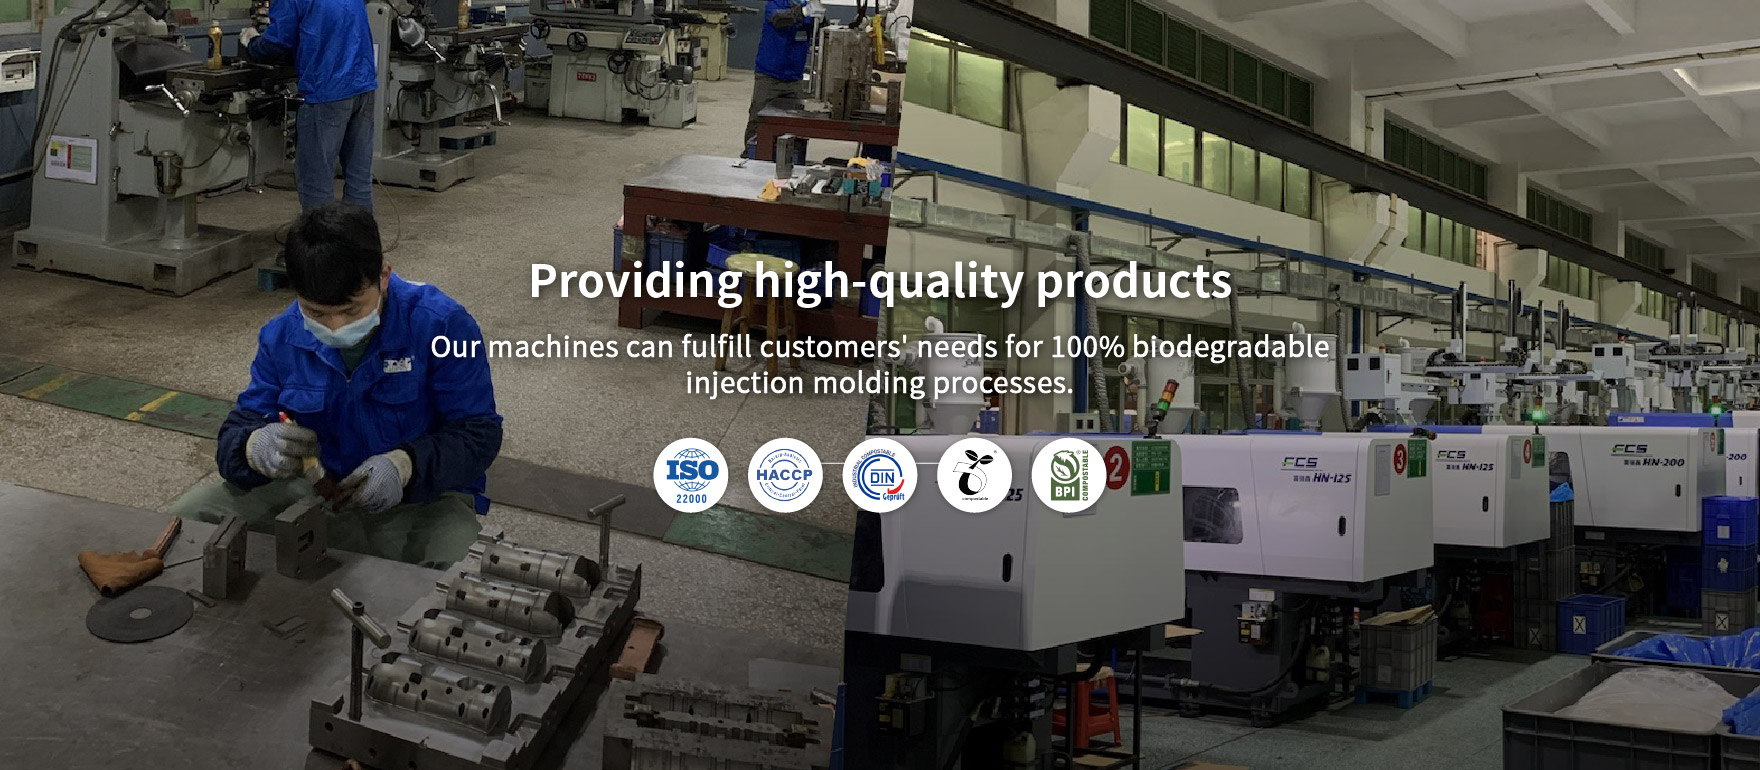 Our machines can fulfill customers' needs for 100% biodegradable injection molding processes.